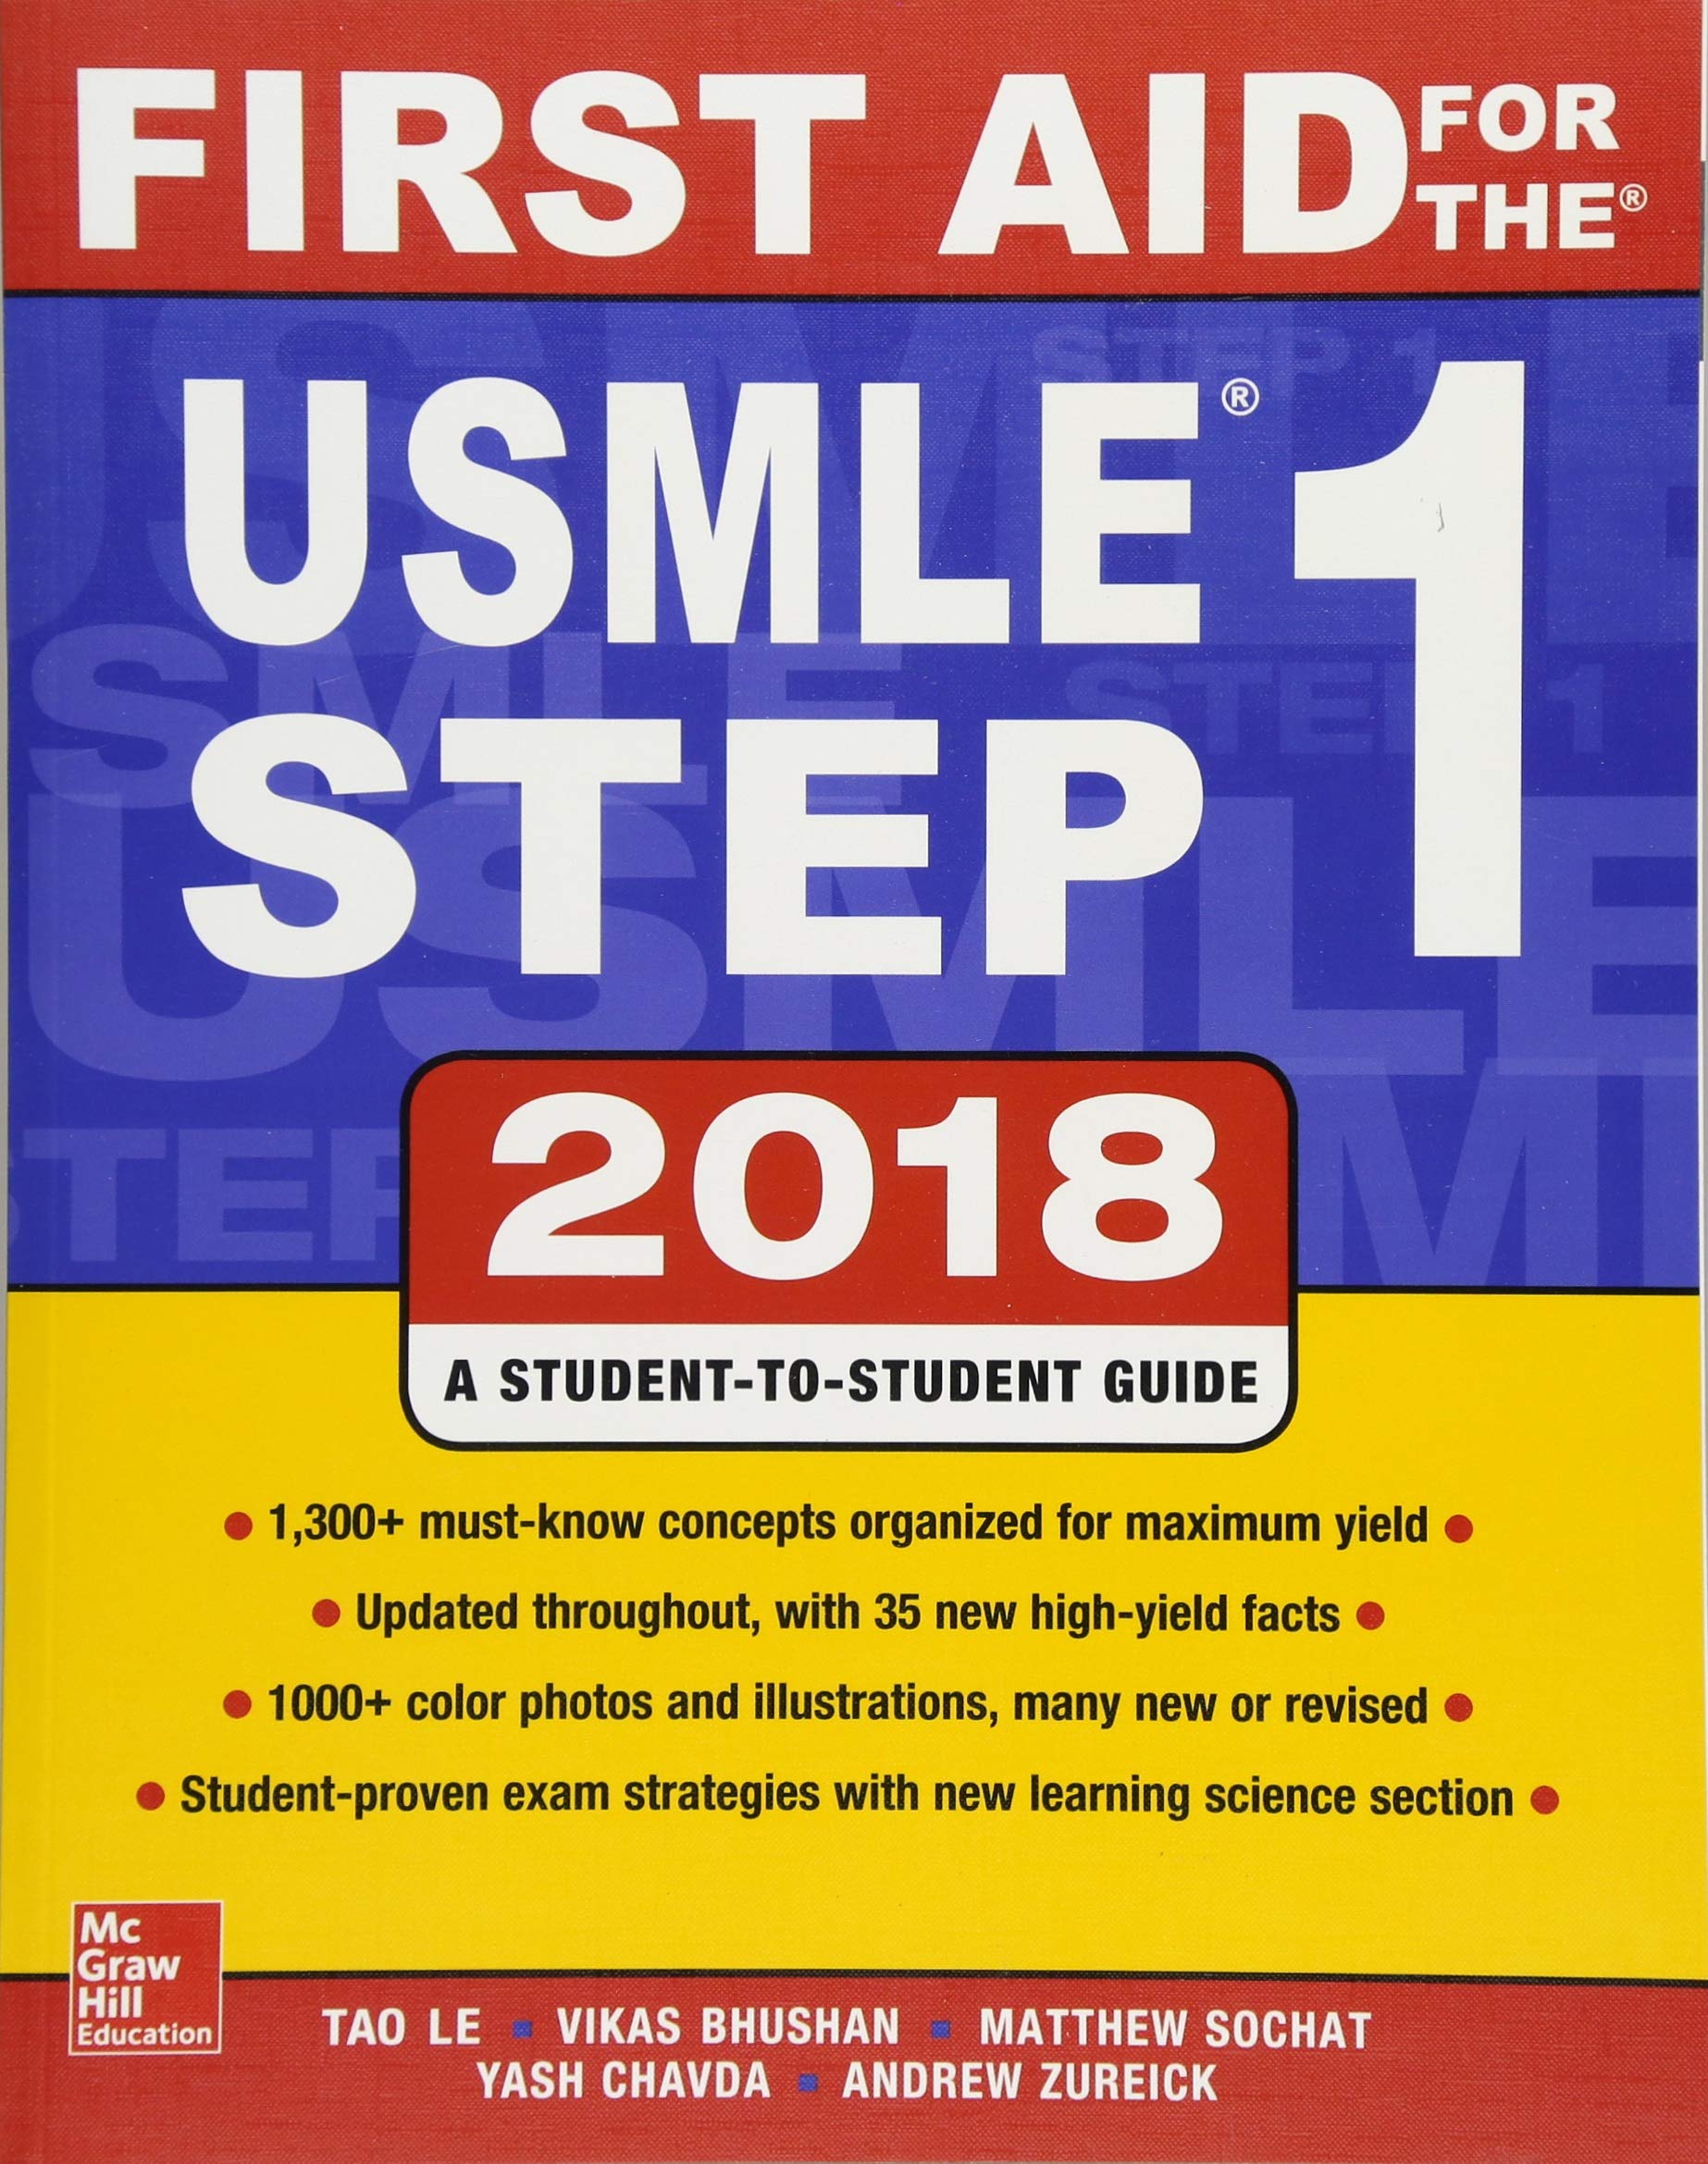 First aid for the USMLE step 1, 2018